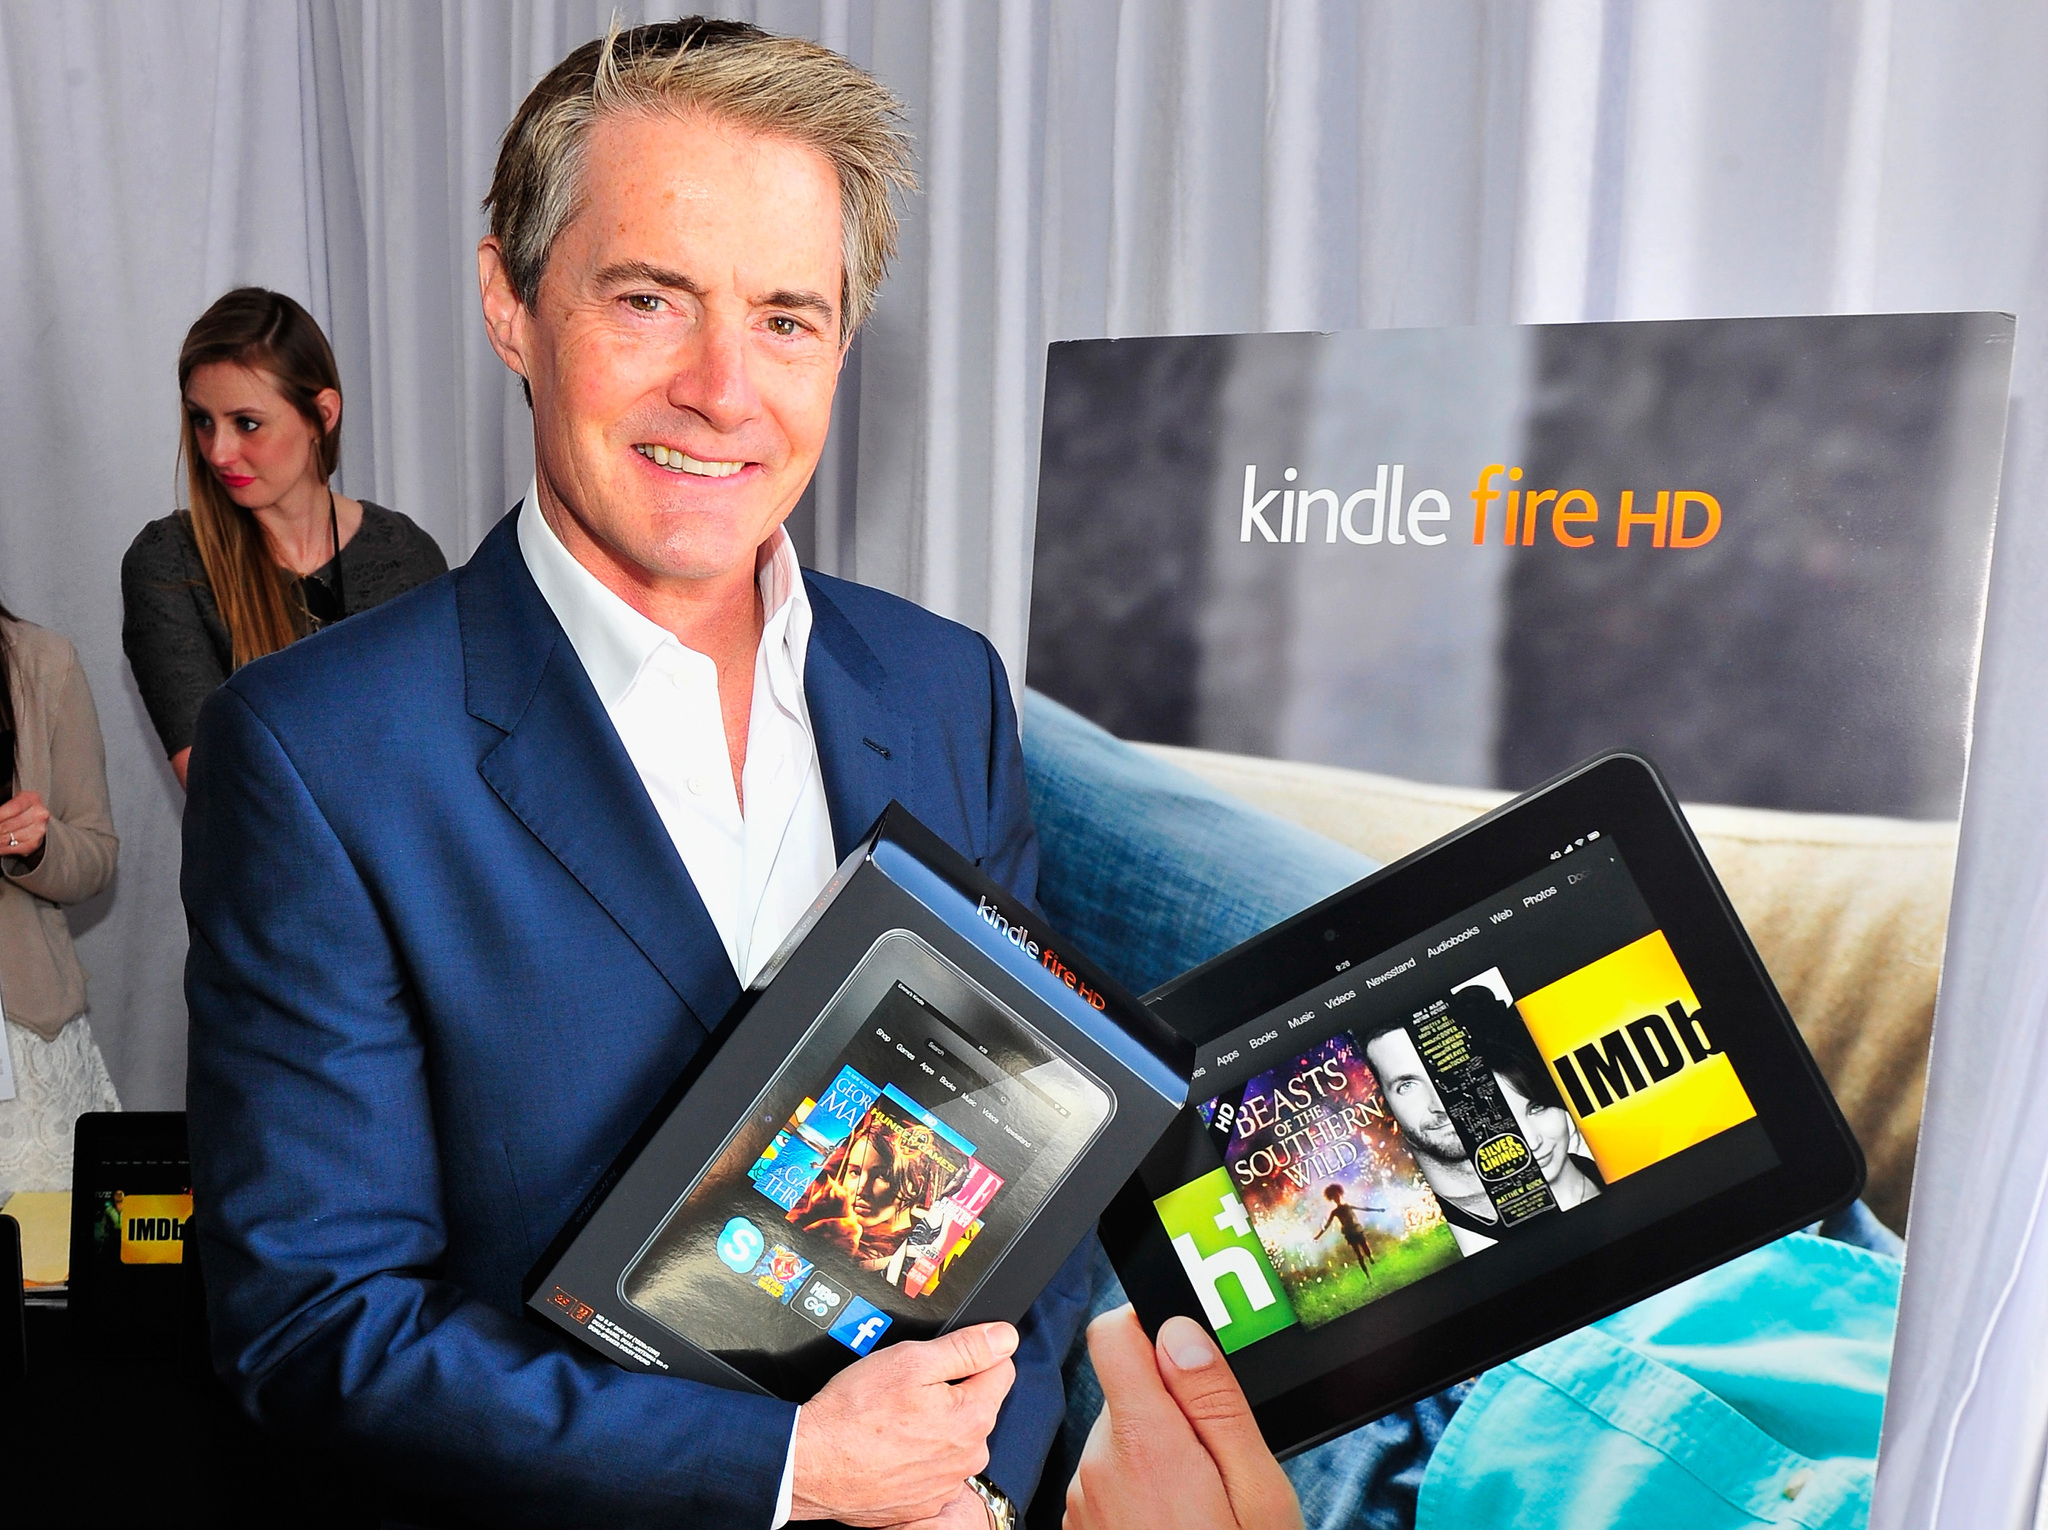 Kyle MacLachlan poses in the Kindle Fire HD and IMDb Green Room during the 2013 Film Independent Spirit Awards at Santa Monica Beach on February 23, 2013 in Santa Monica, California.